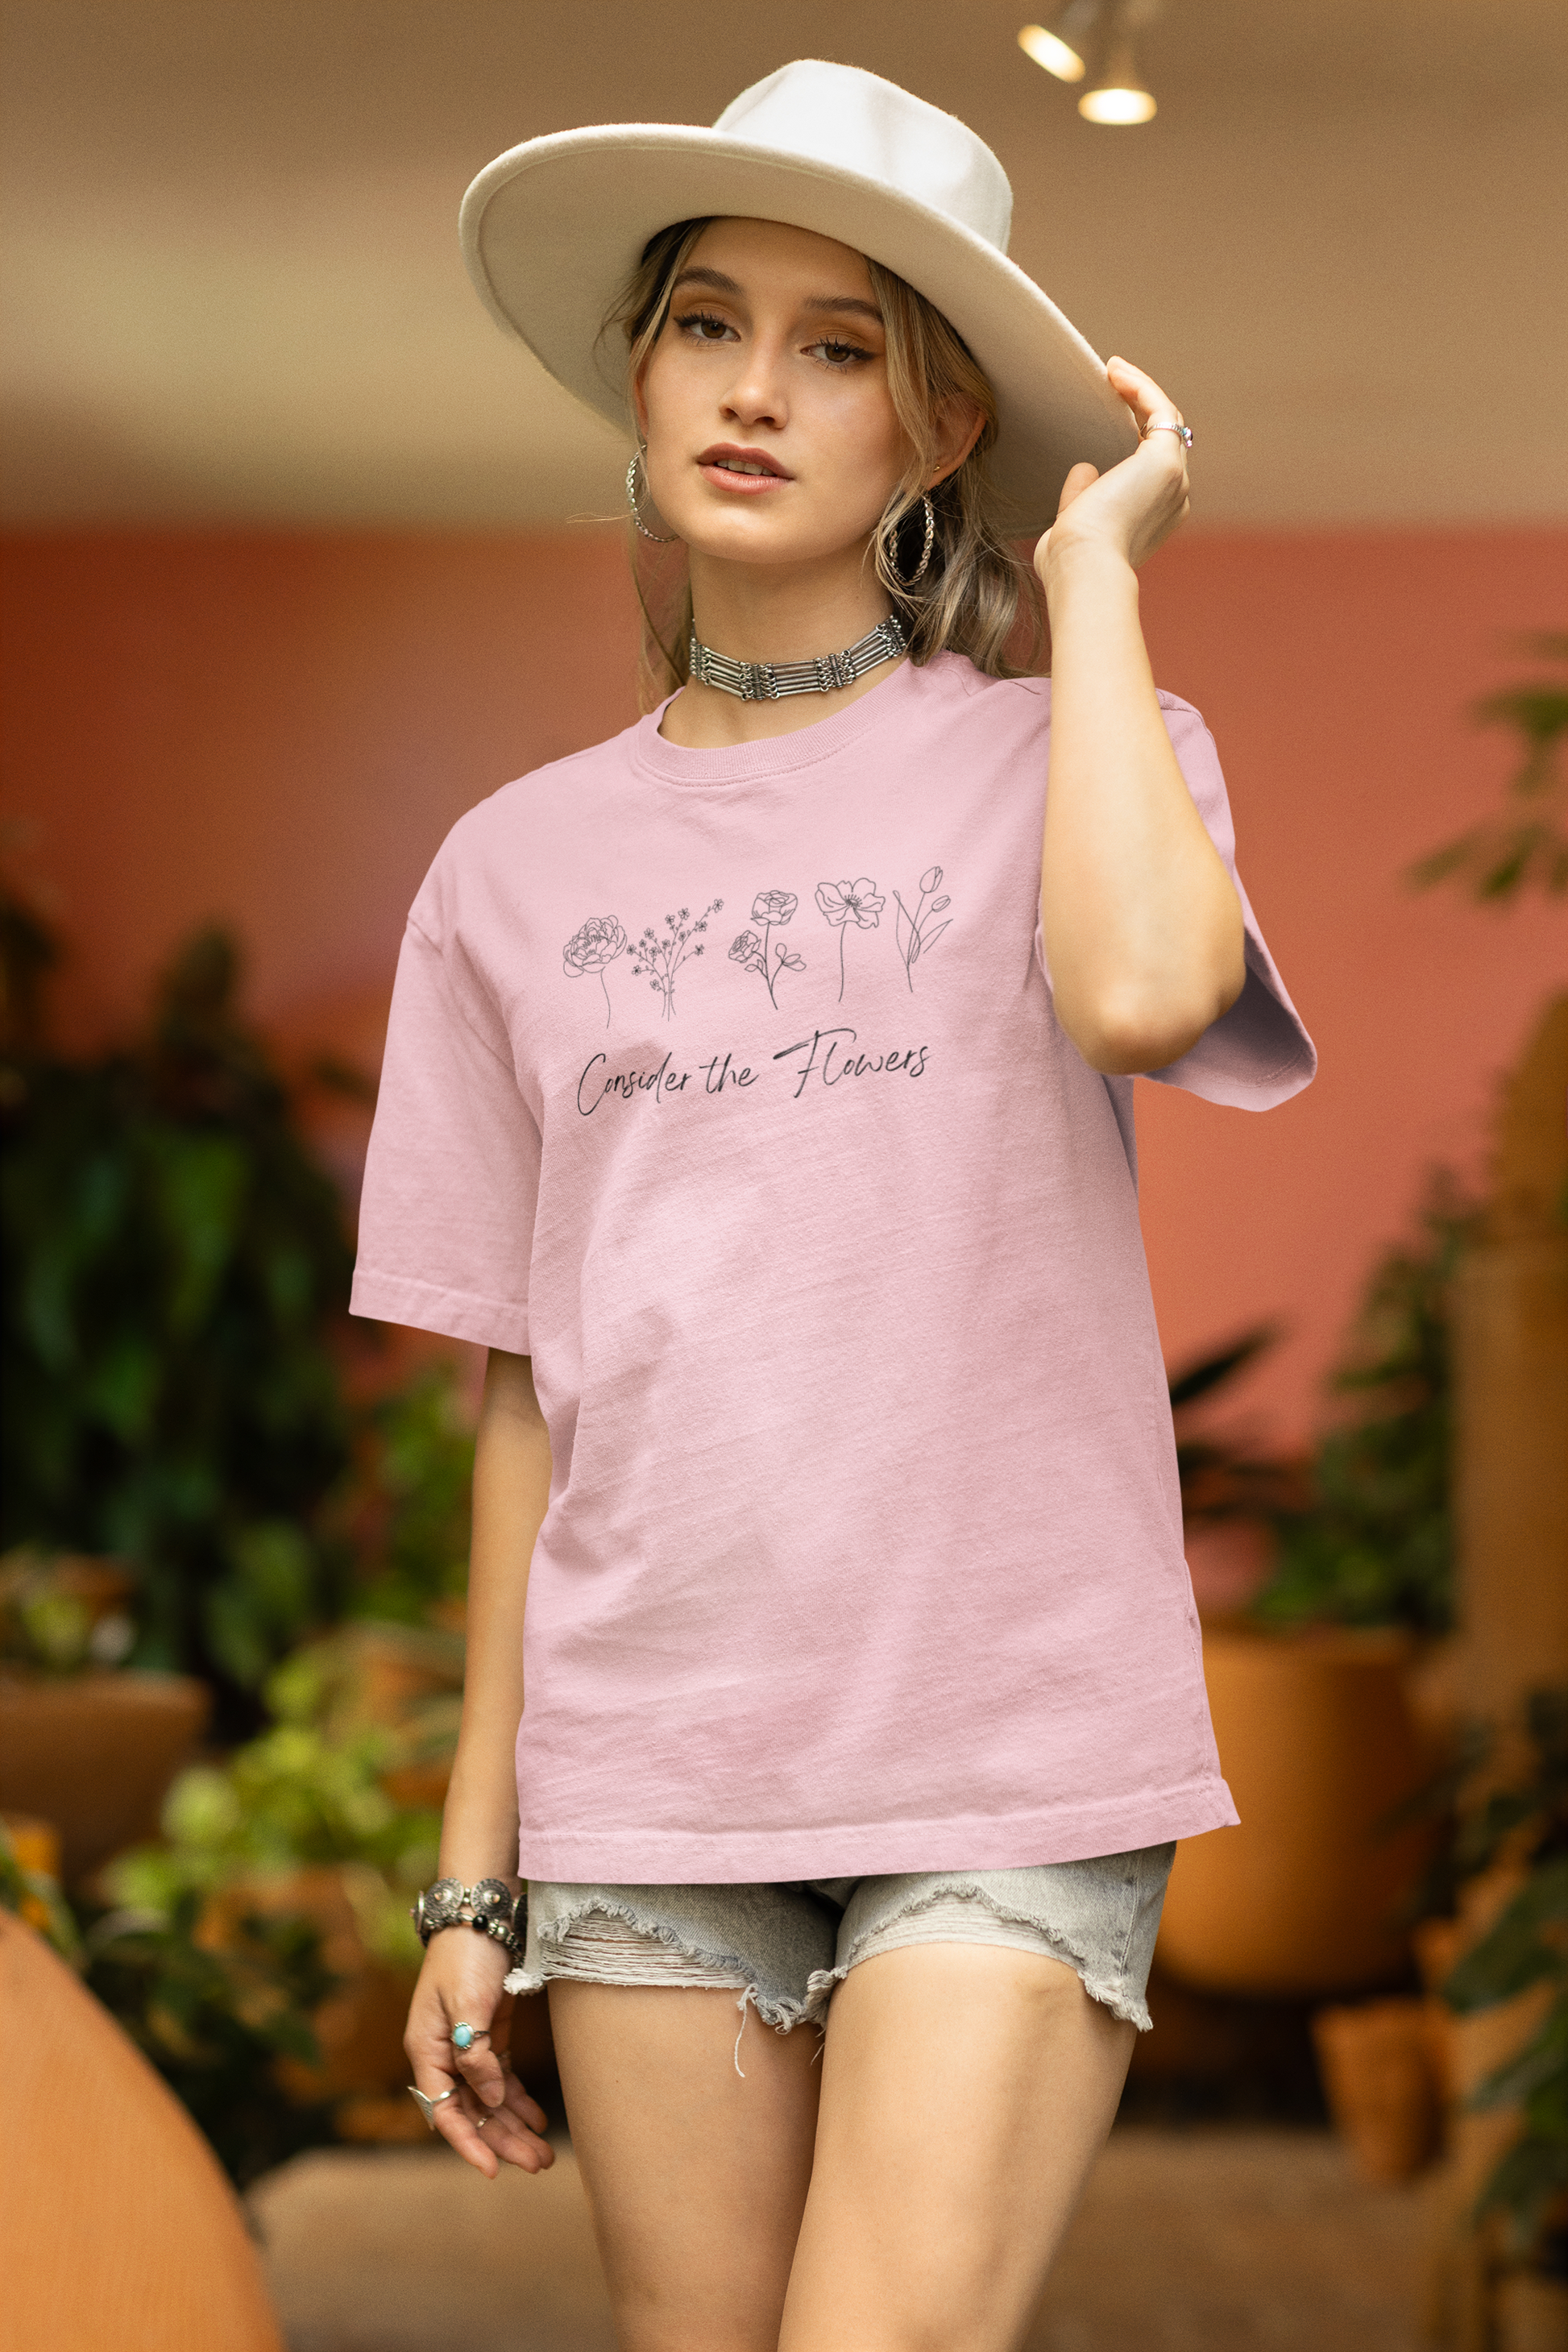 Floral Graphic Tee - Christian T Shirt for Women - Small Pink